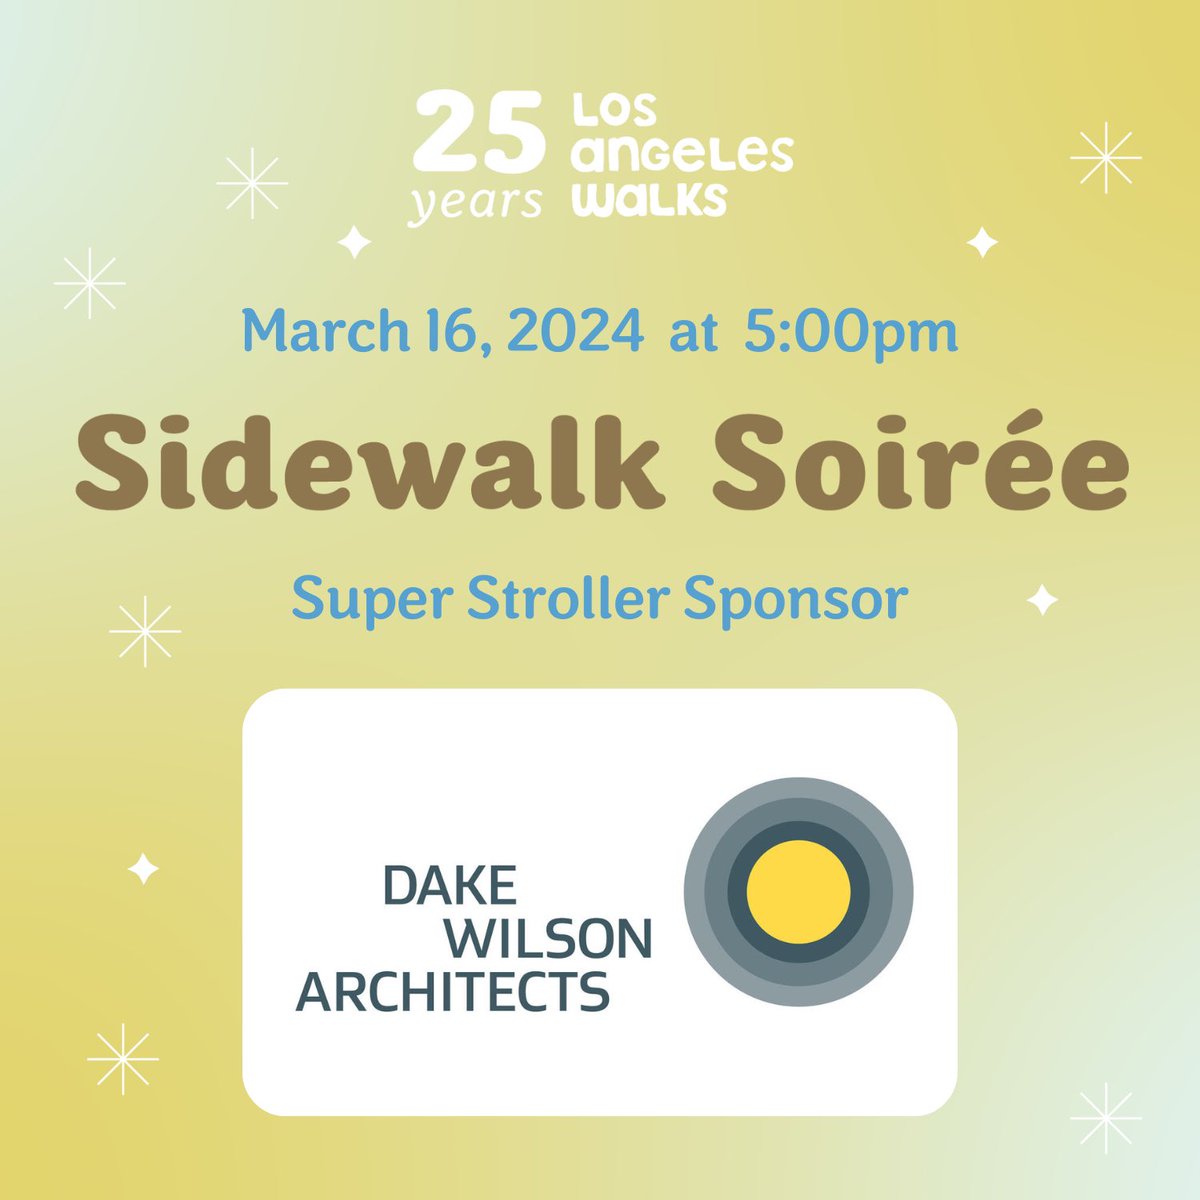 Thank you to our Super Stroller Sponsor Dake Wilson Architects — your support makes our work possible. There’s still time to get tickets or sponsor our Sidewalk Soirée on Saturday, March 16. losangeleswalks.org/2024_sidewalk_…